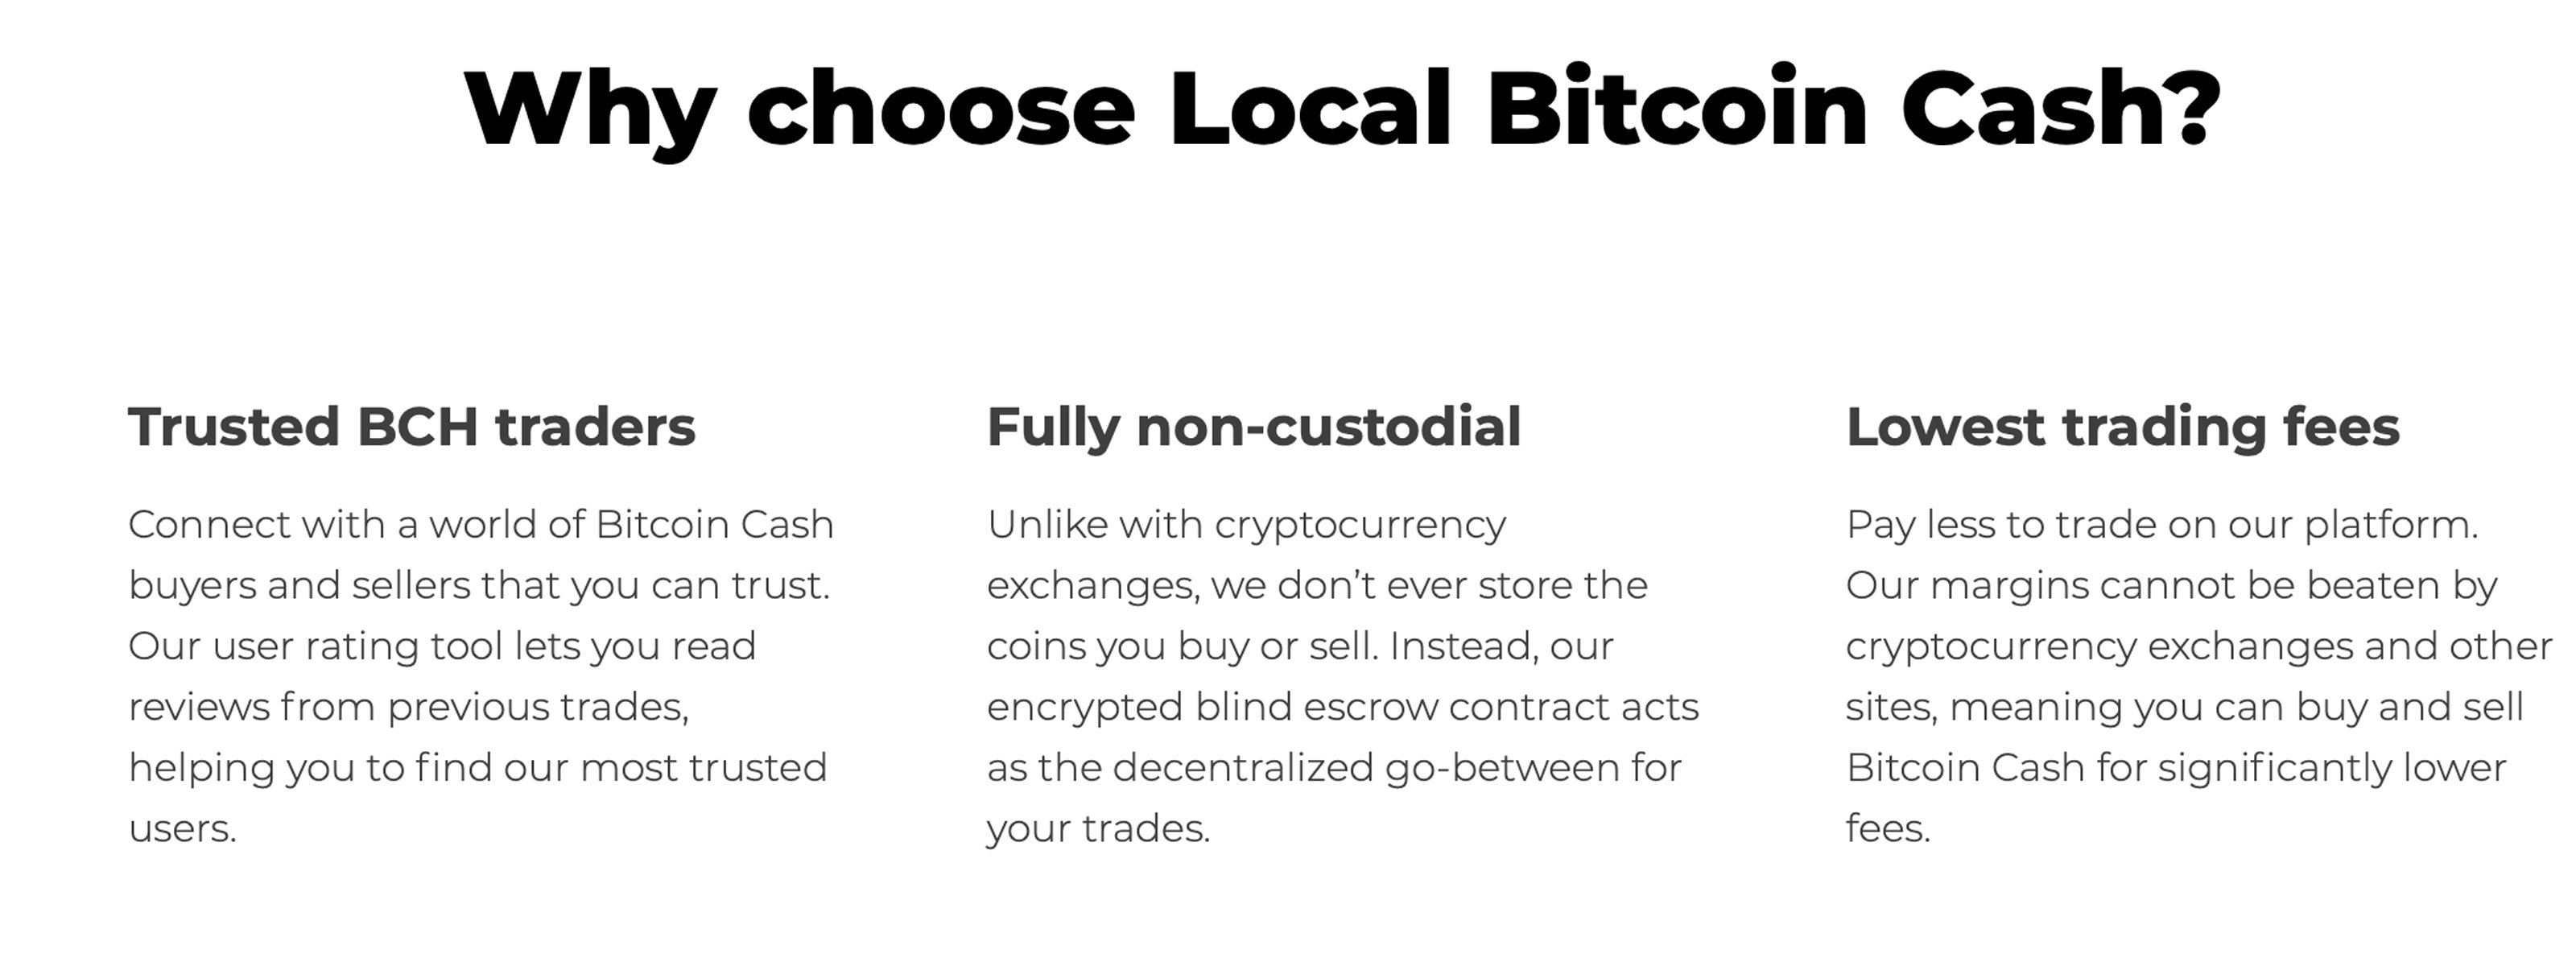 Bitcoin.com's Local Bitcoin Cash Marketplace Gathers Thousands of Pre-Launch Signups